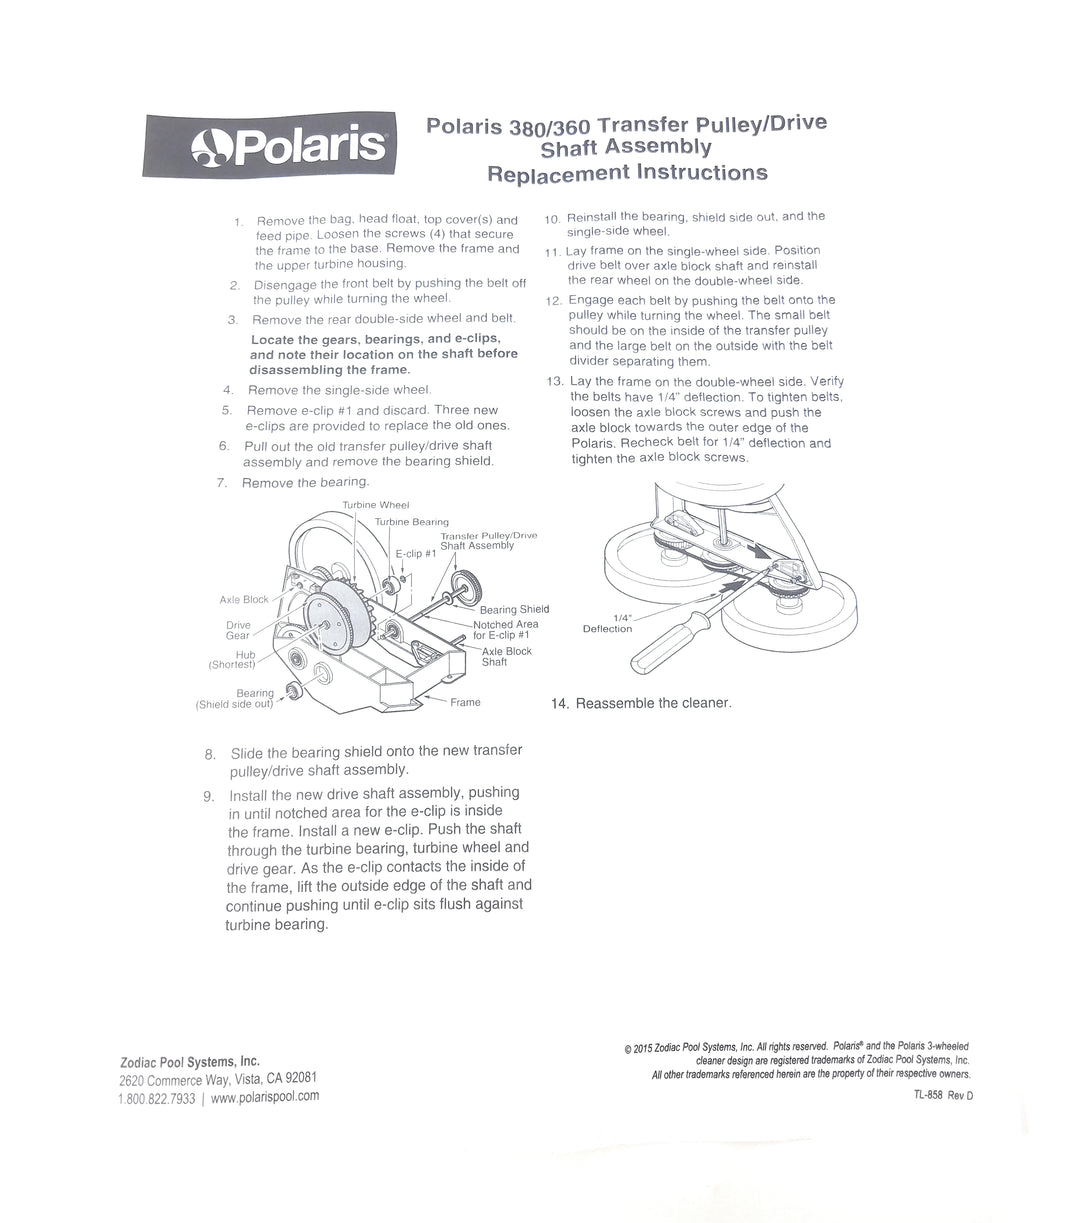 Instruction Paper View -Polaris Vac-Sweep 380 / 360 and "Trade Series Exclusive" TR35P / TR36P Pressure Cleaner Trans Pulley/Drive Shaft Assembly (9-100-1007)